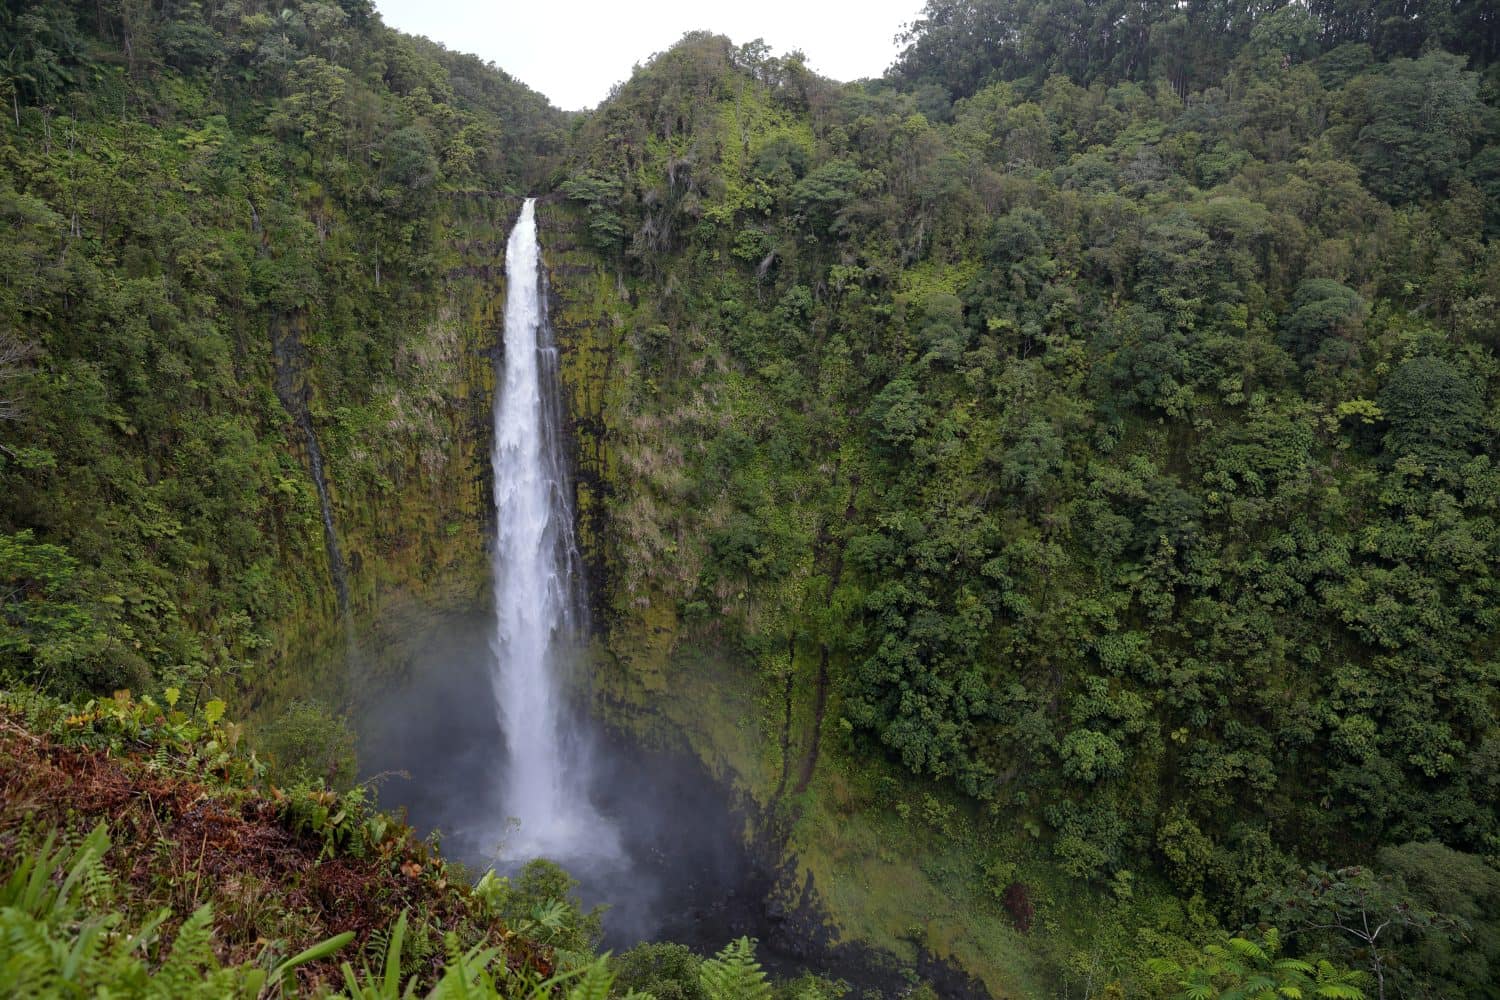 View at Akaka falls at KoleKole stream, Big Island, Hawaii. Stream of water falling from a cliff surrounded by lush tropical forest